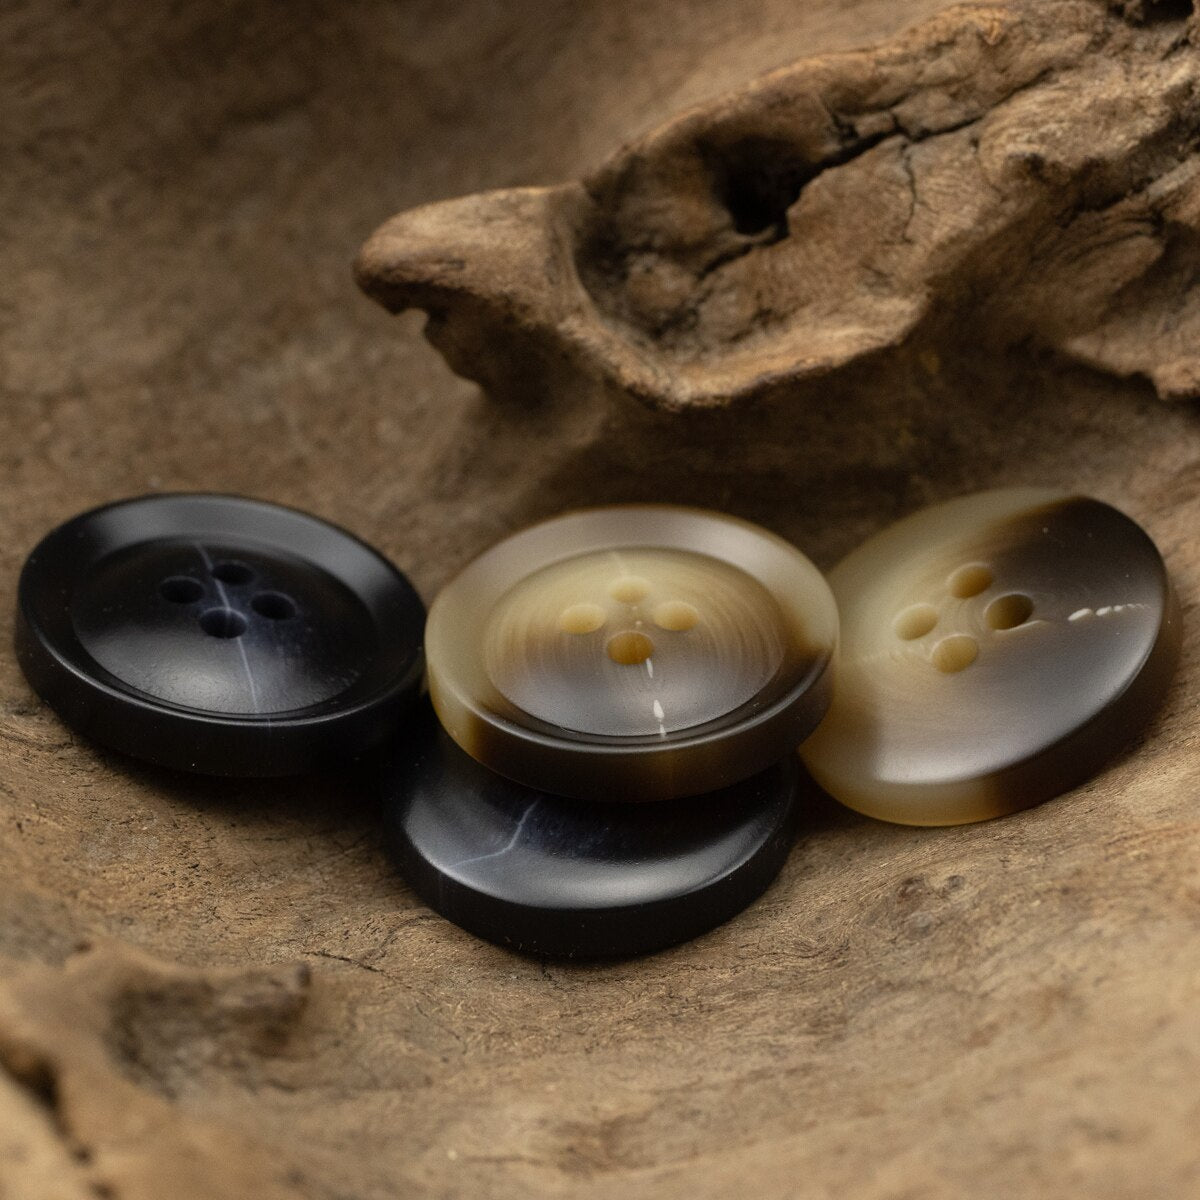 10pcs/lot Horn Imitation Resin Buttons for Clothing Suit Jacket Coat Buttons